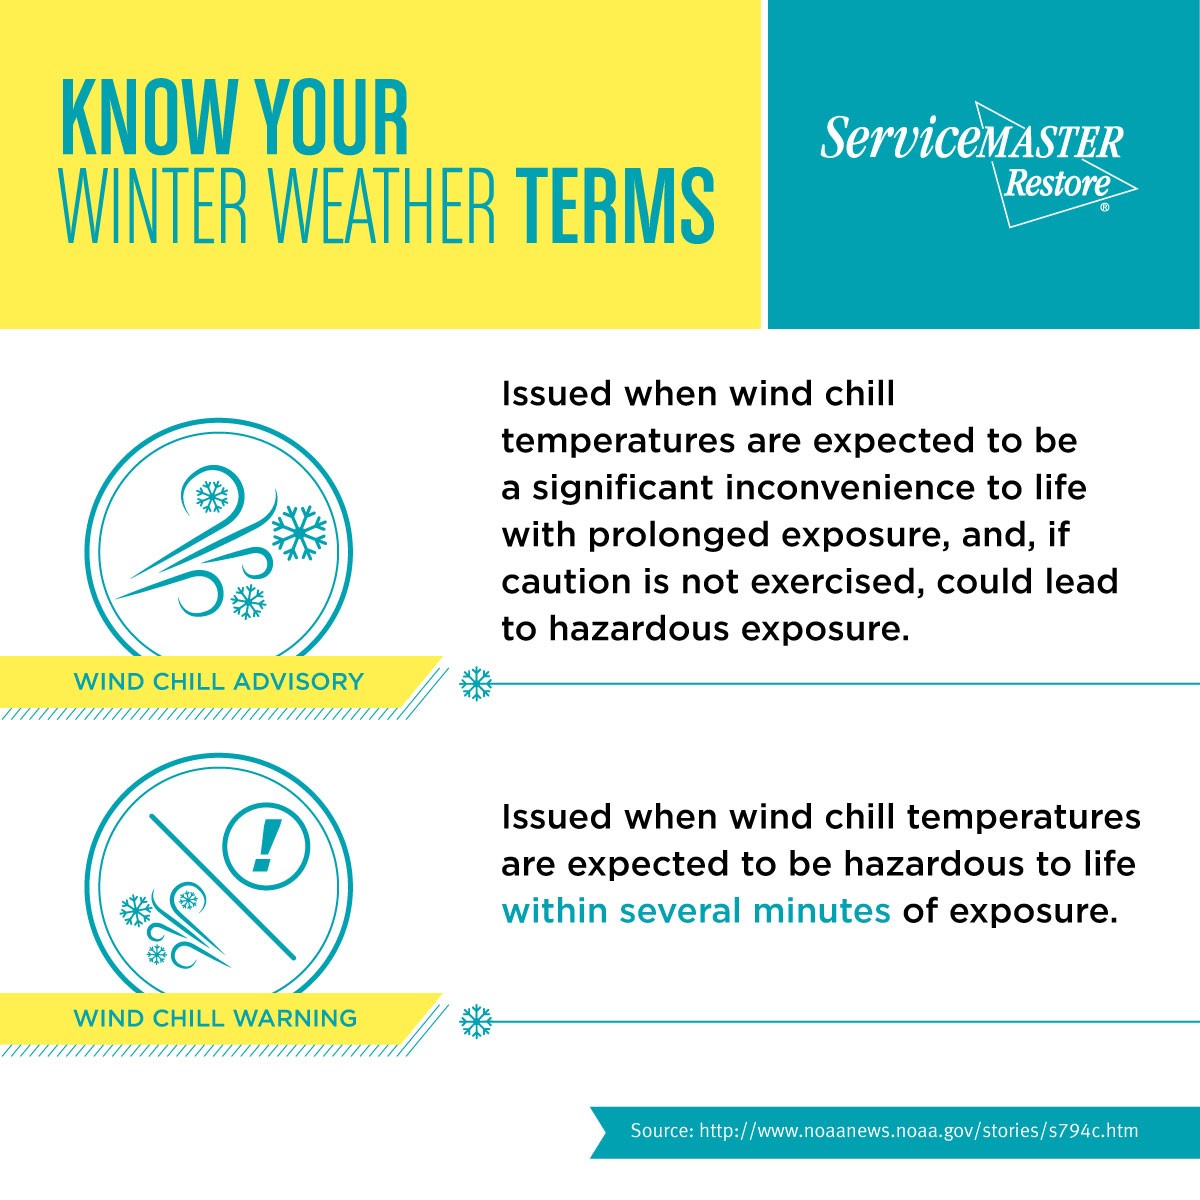 Winter weather terms